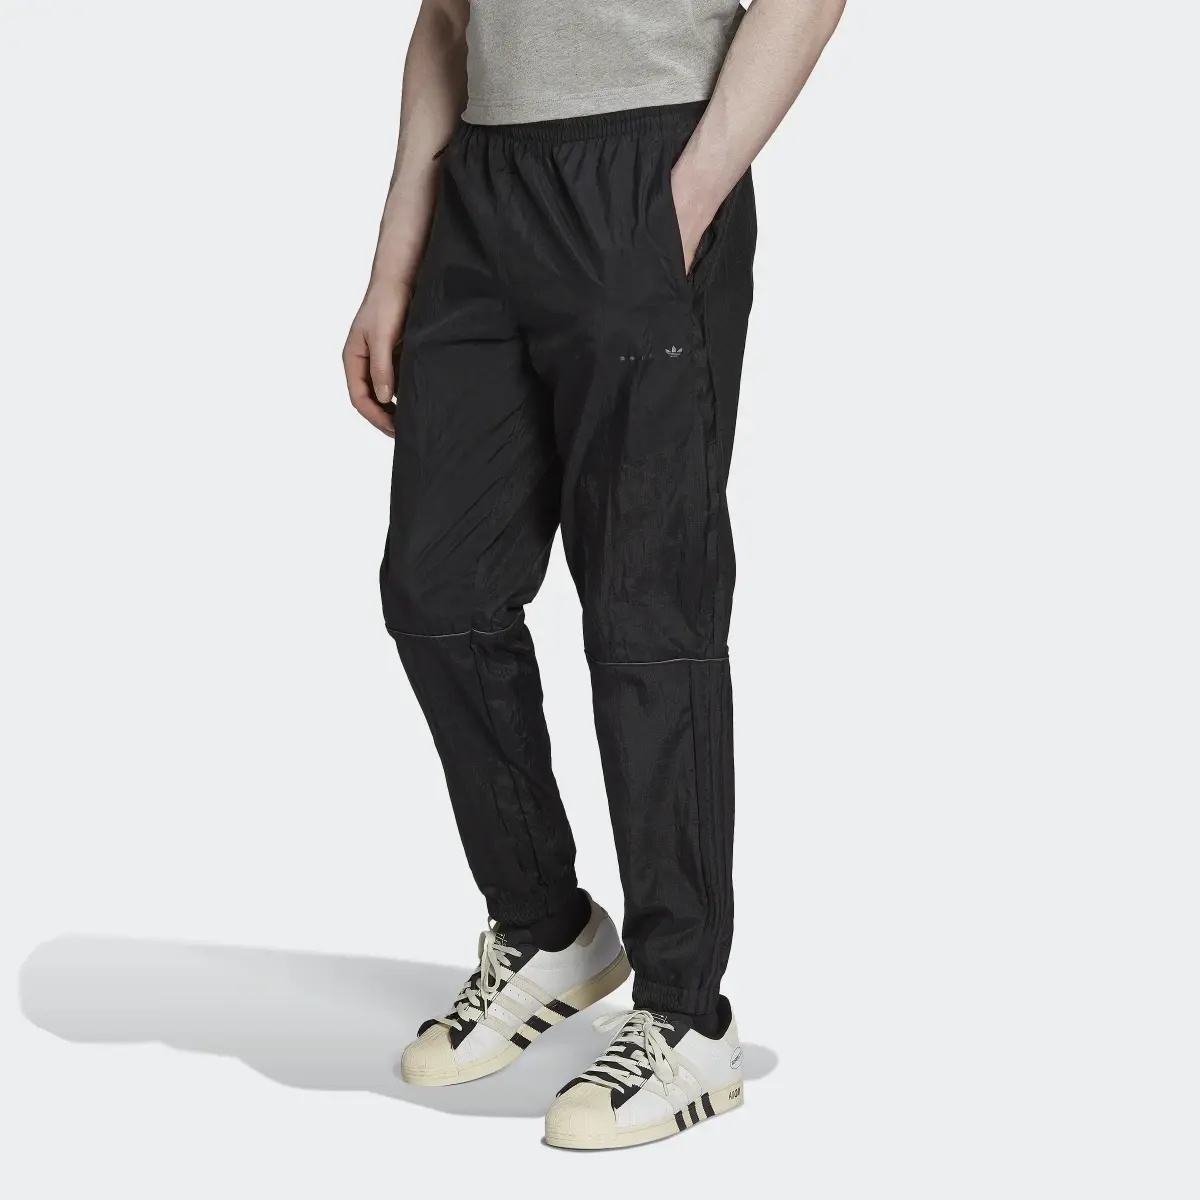 Adidas Reveal Material Mix Tracksuit Bottoms. 1